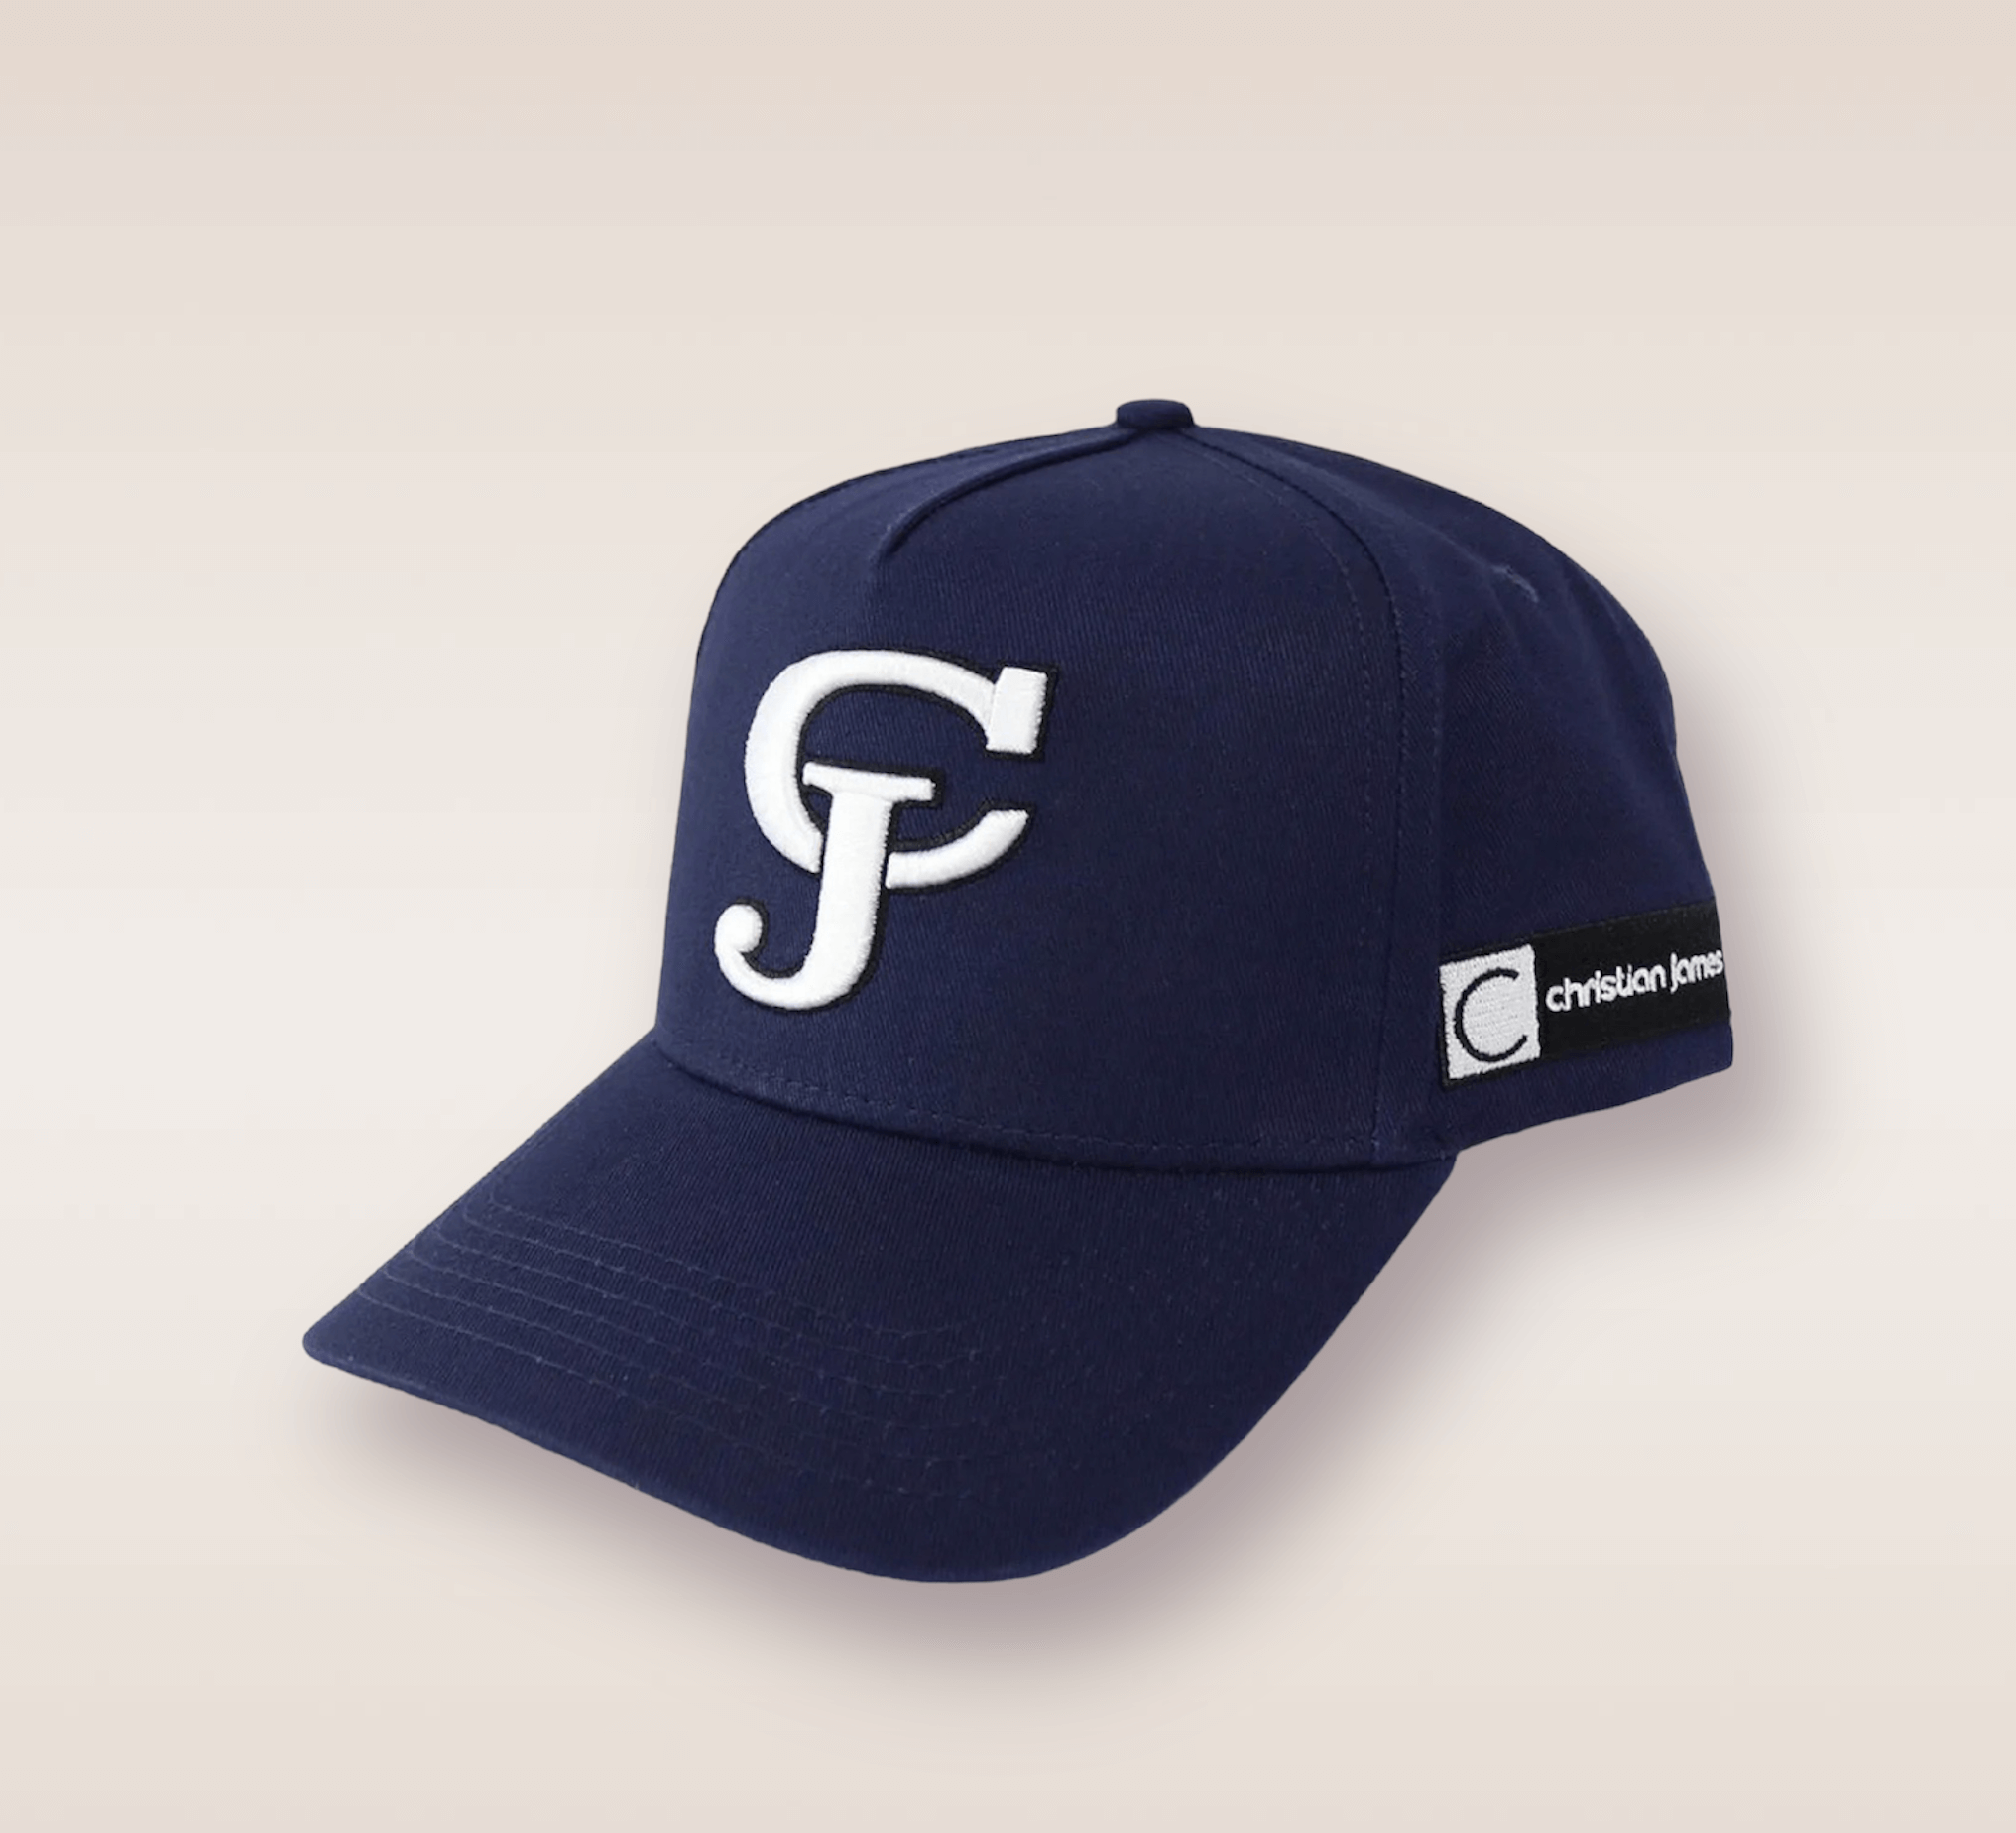 In this up-close shot, we are introduced to the Navy Blue CJ Snapback. The hat features a deep navy blue color that exudes a sense of sophistication and versatility. Embroidered in white lettering is the brand’s acronym 